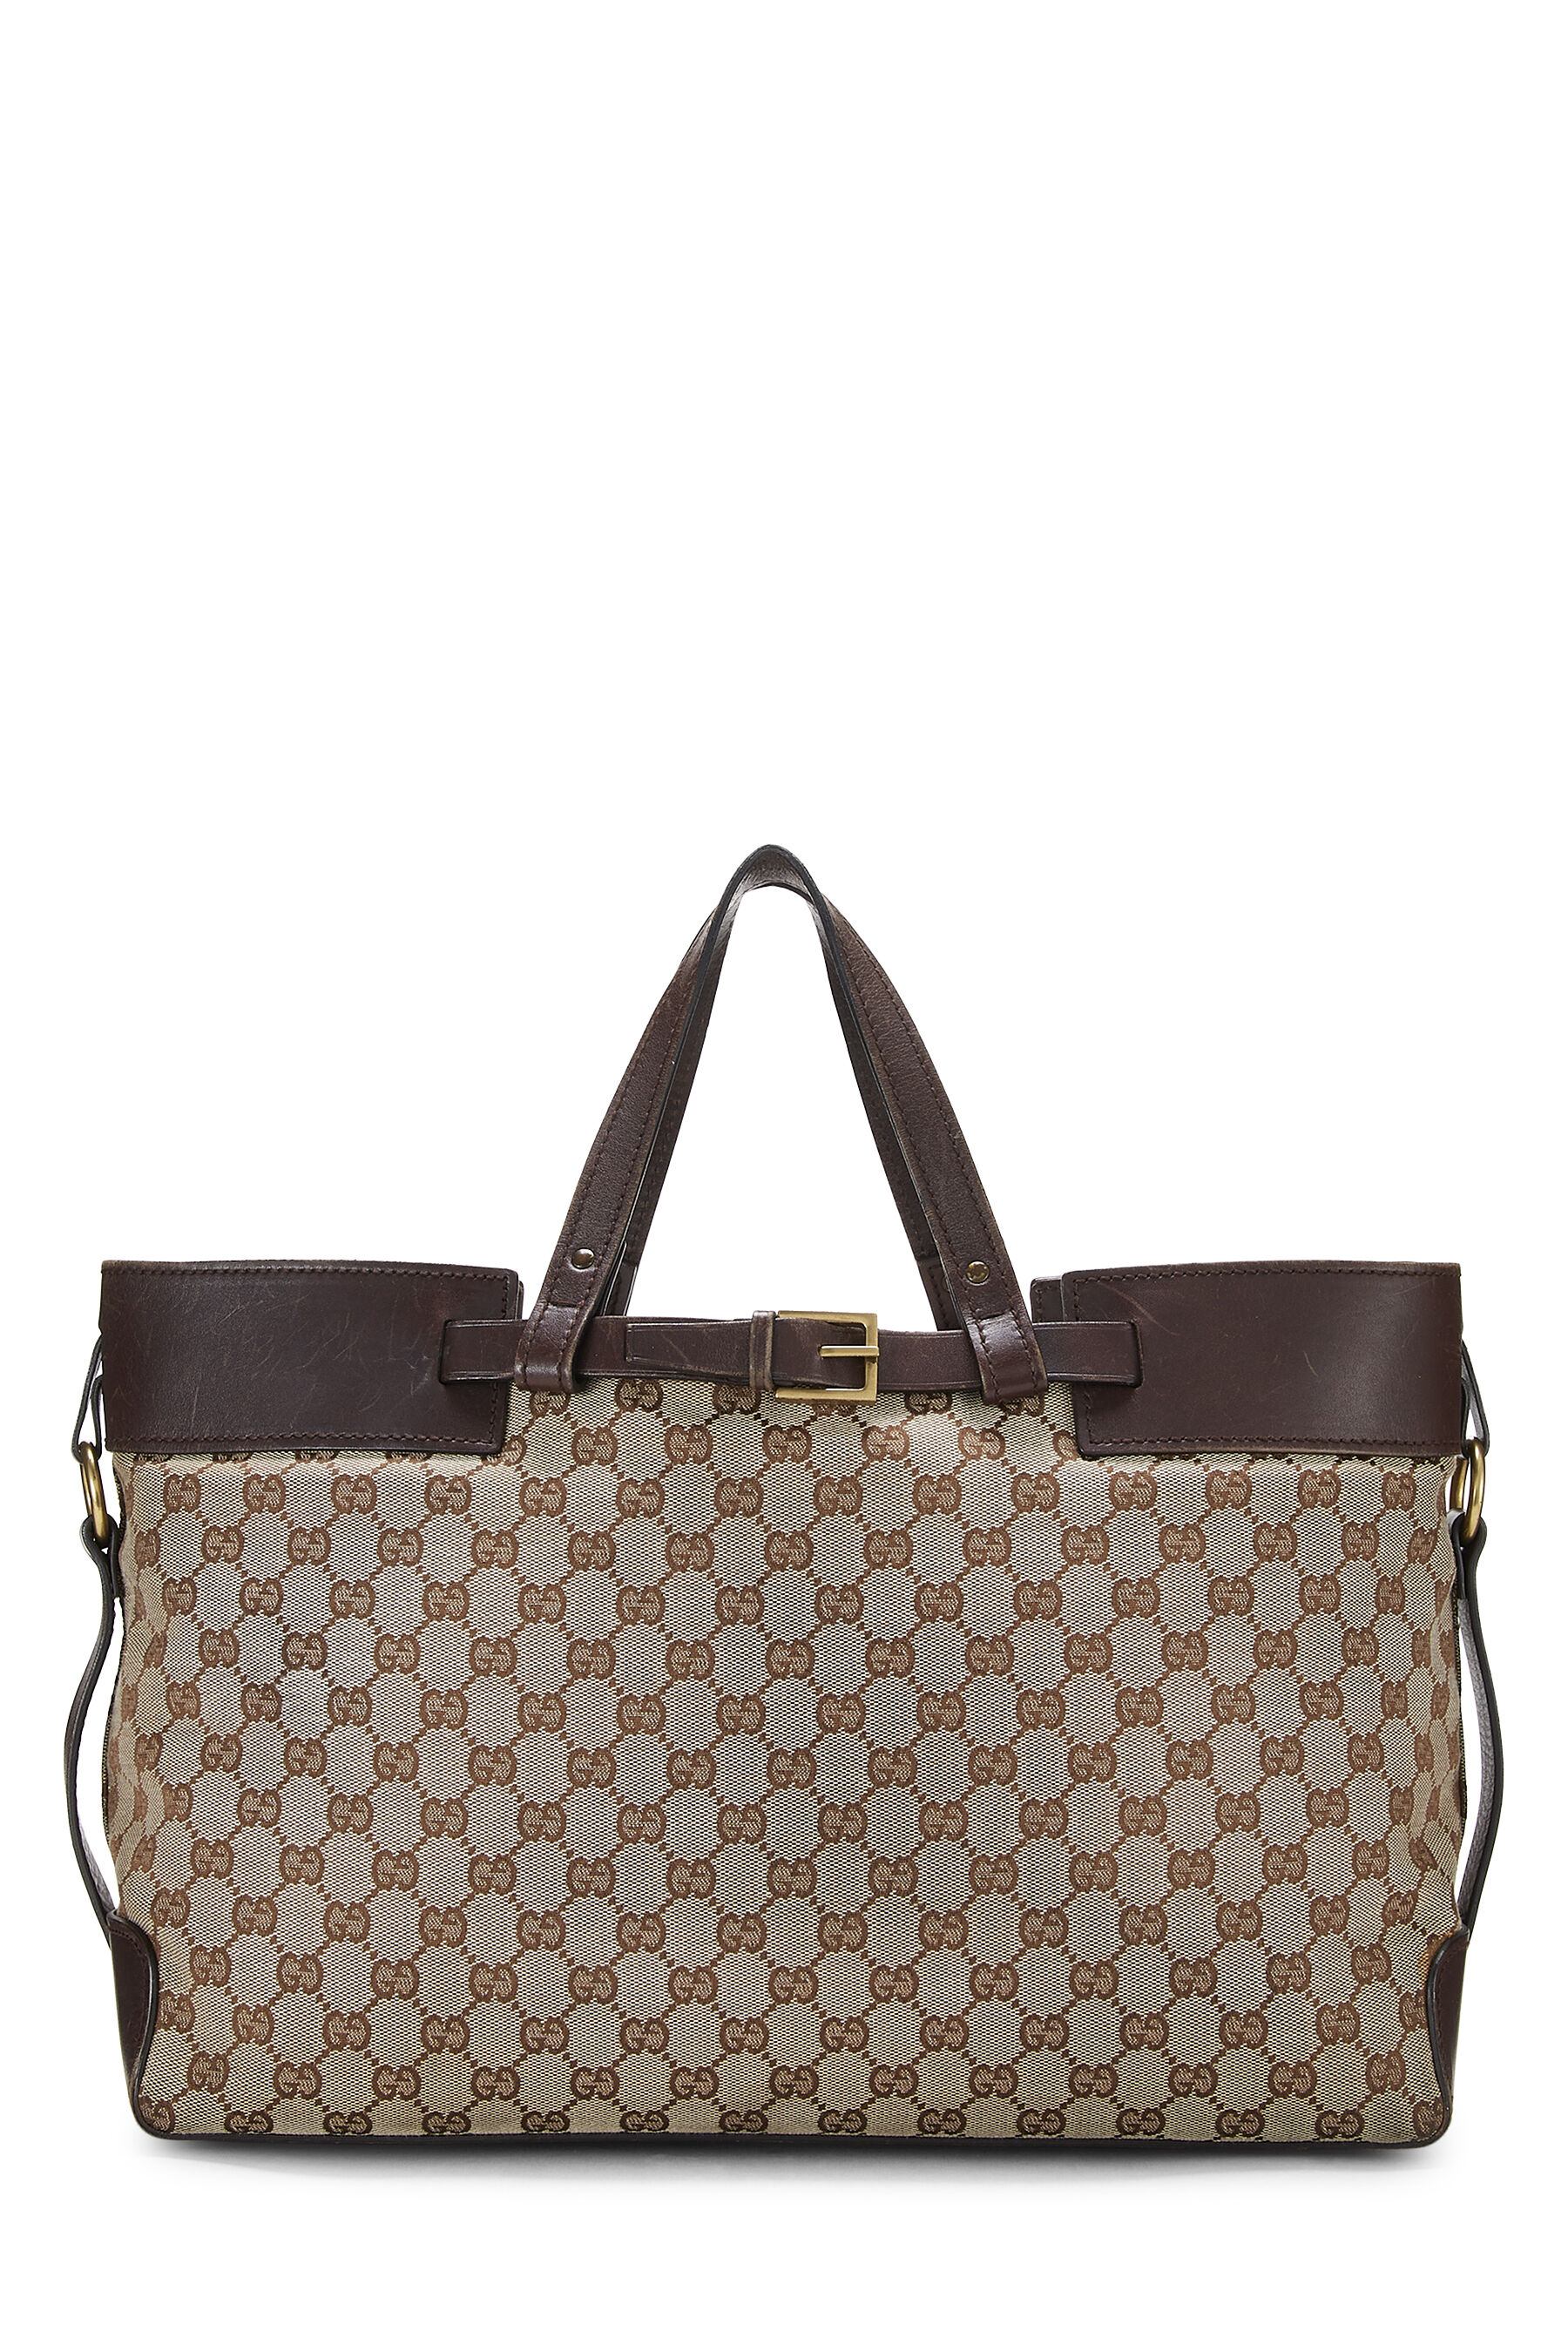 Gucci Brown Original GG Canvas Buckle Tote Large